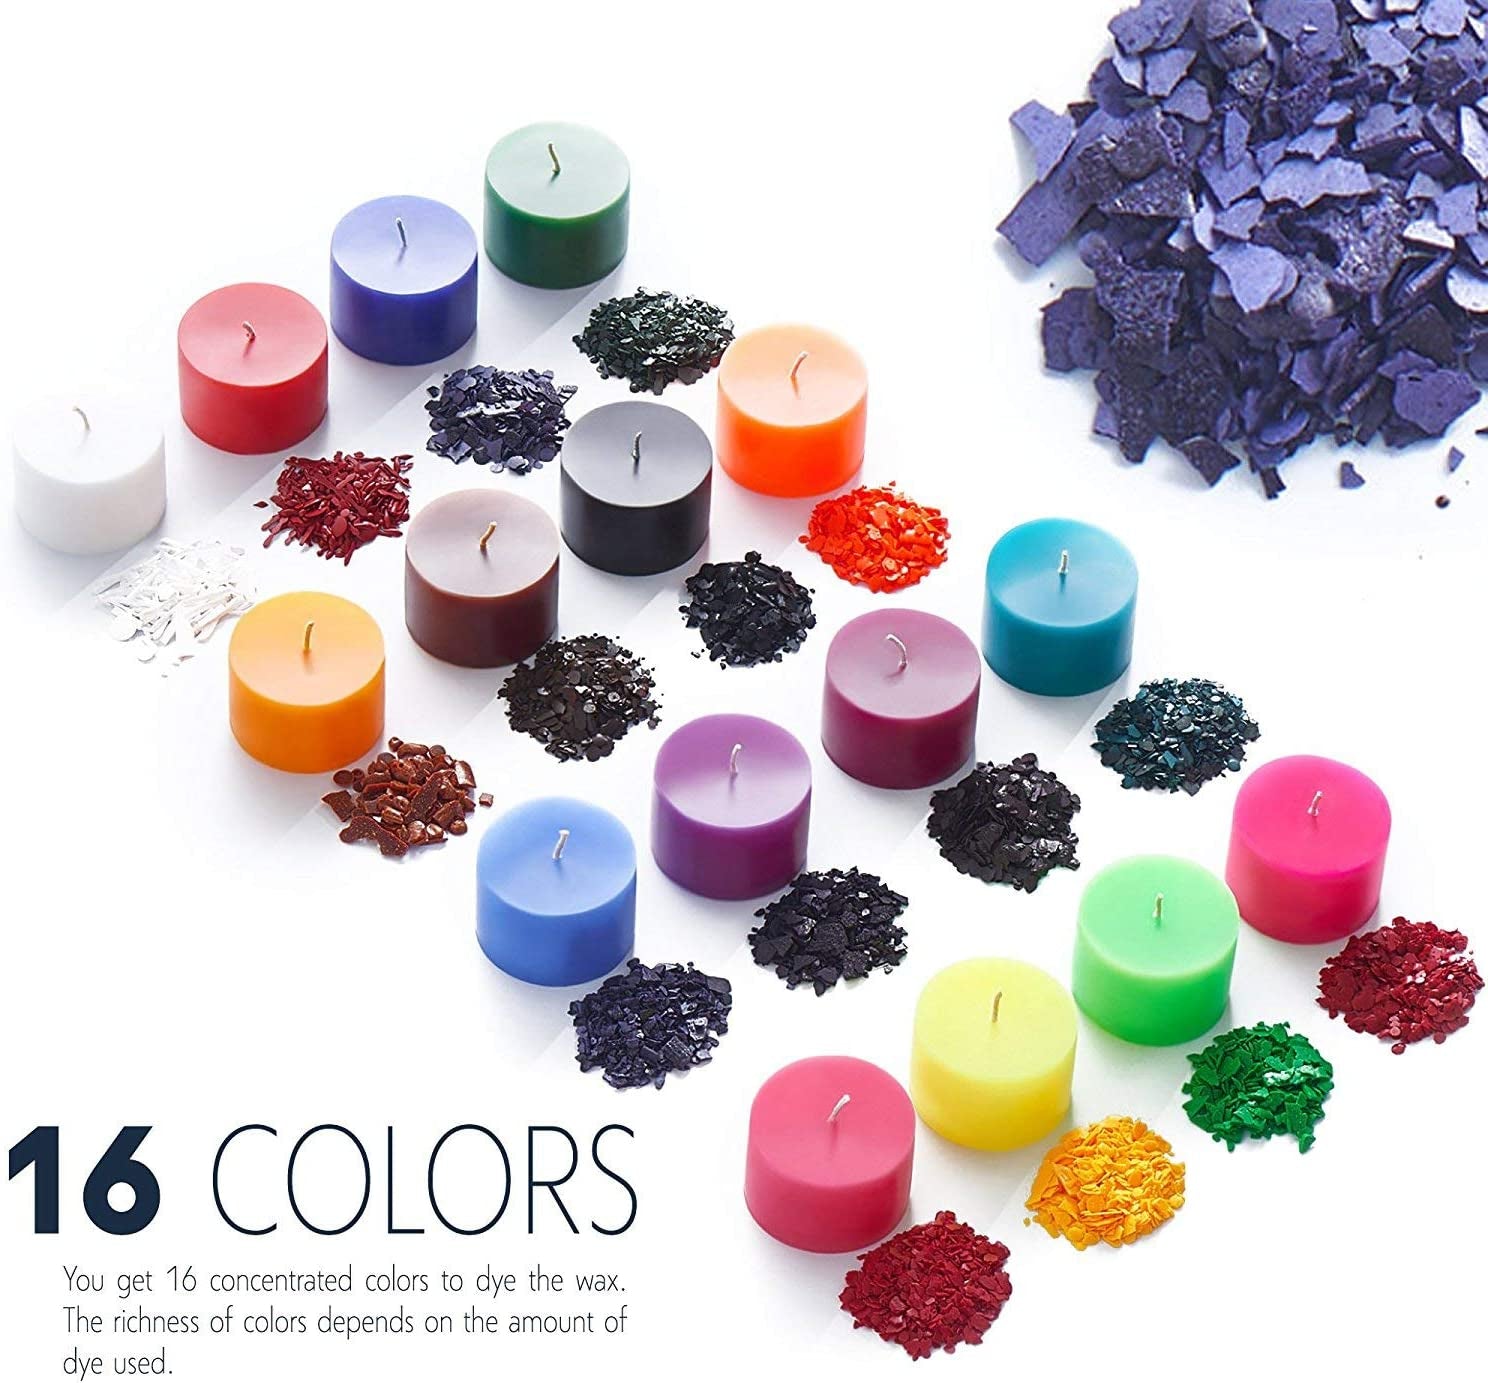 Candle Dyes for Soy Candle Making - Wax Сolor Dye Color Chips for Soy Wax - 16 Popular Colors Wax Dye Flakes